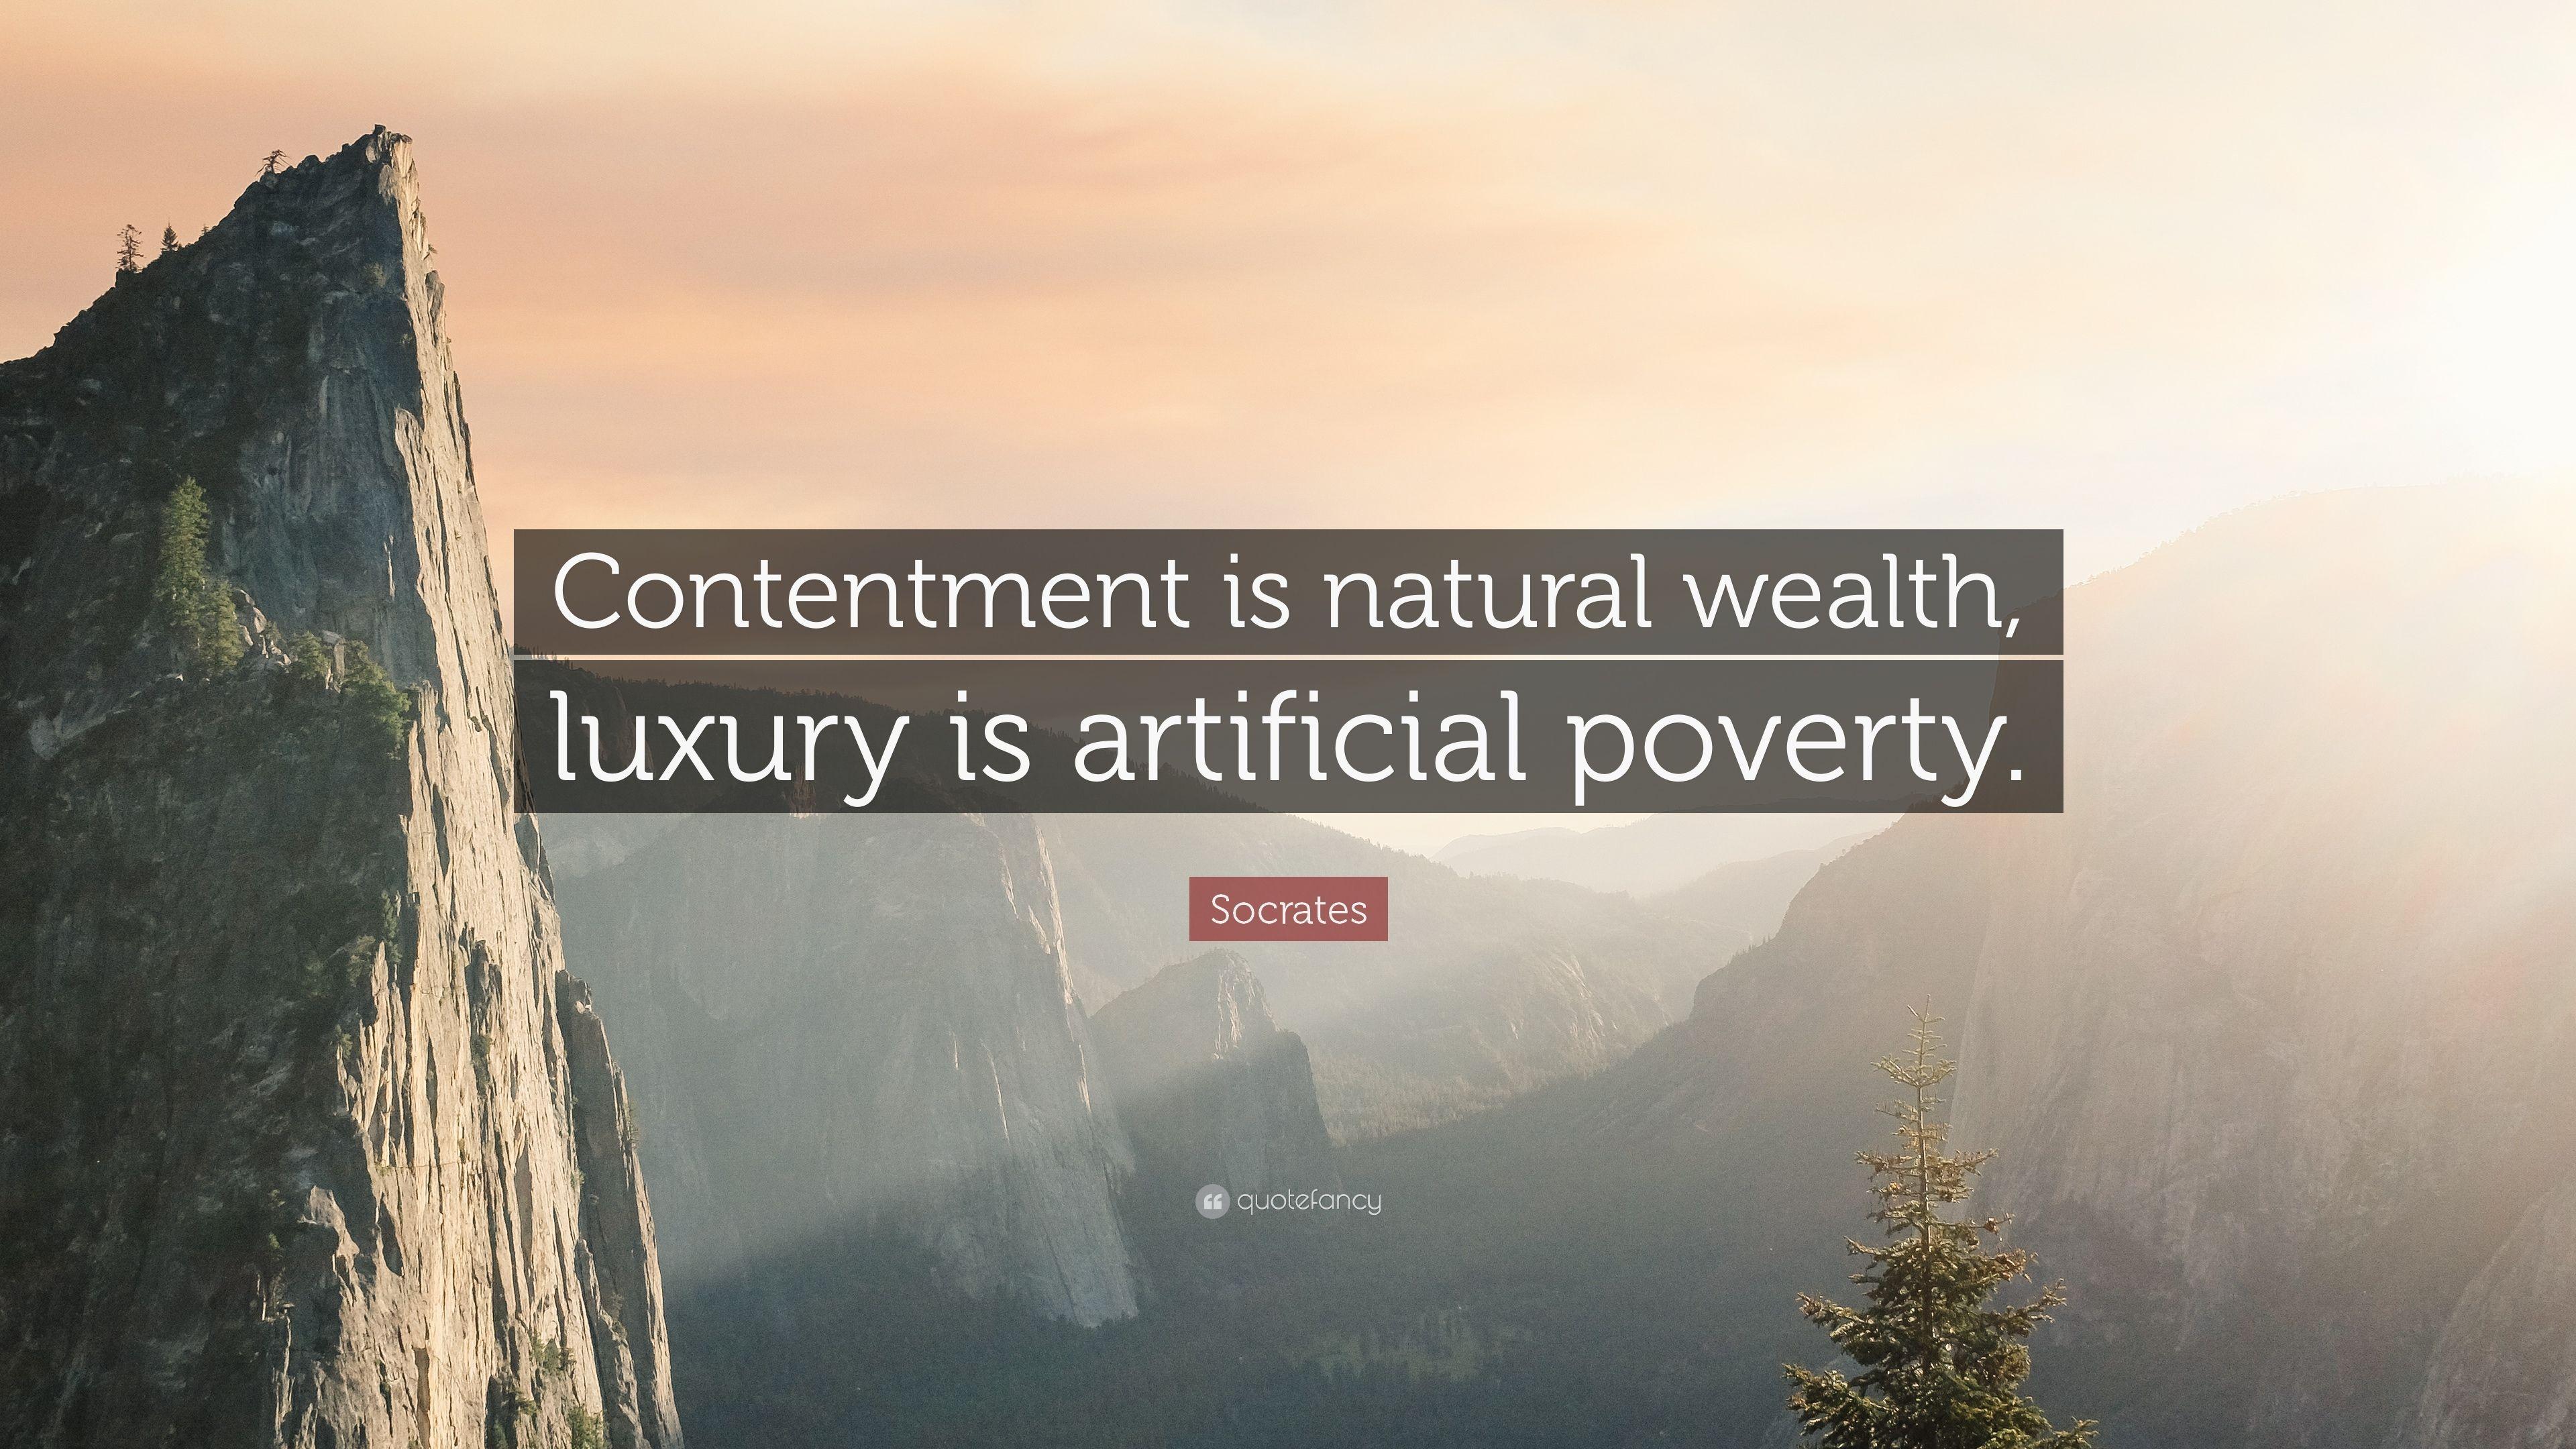 Socrates Quote: “Contentment is natural wealth, luxury is